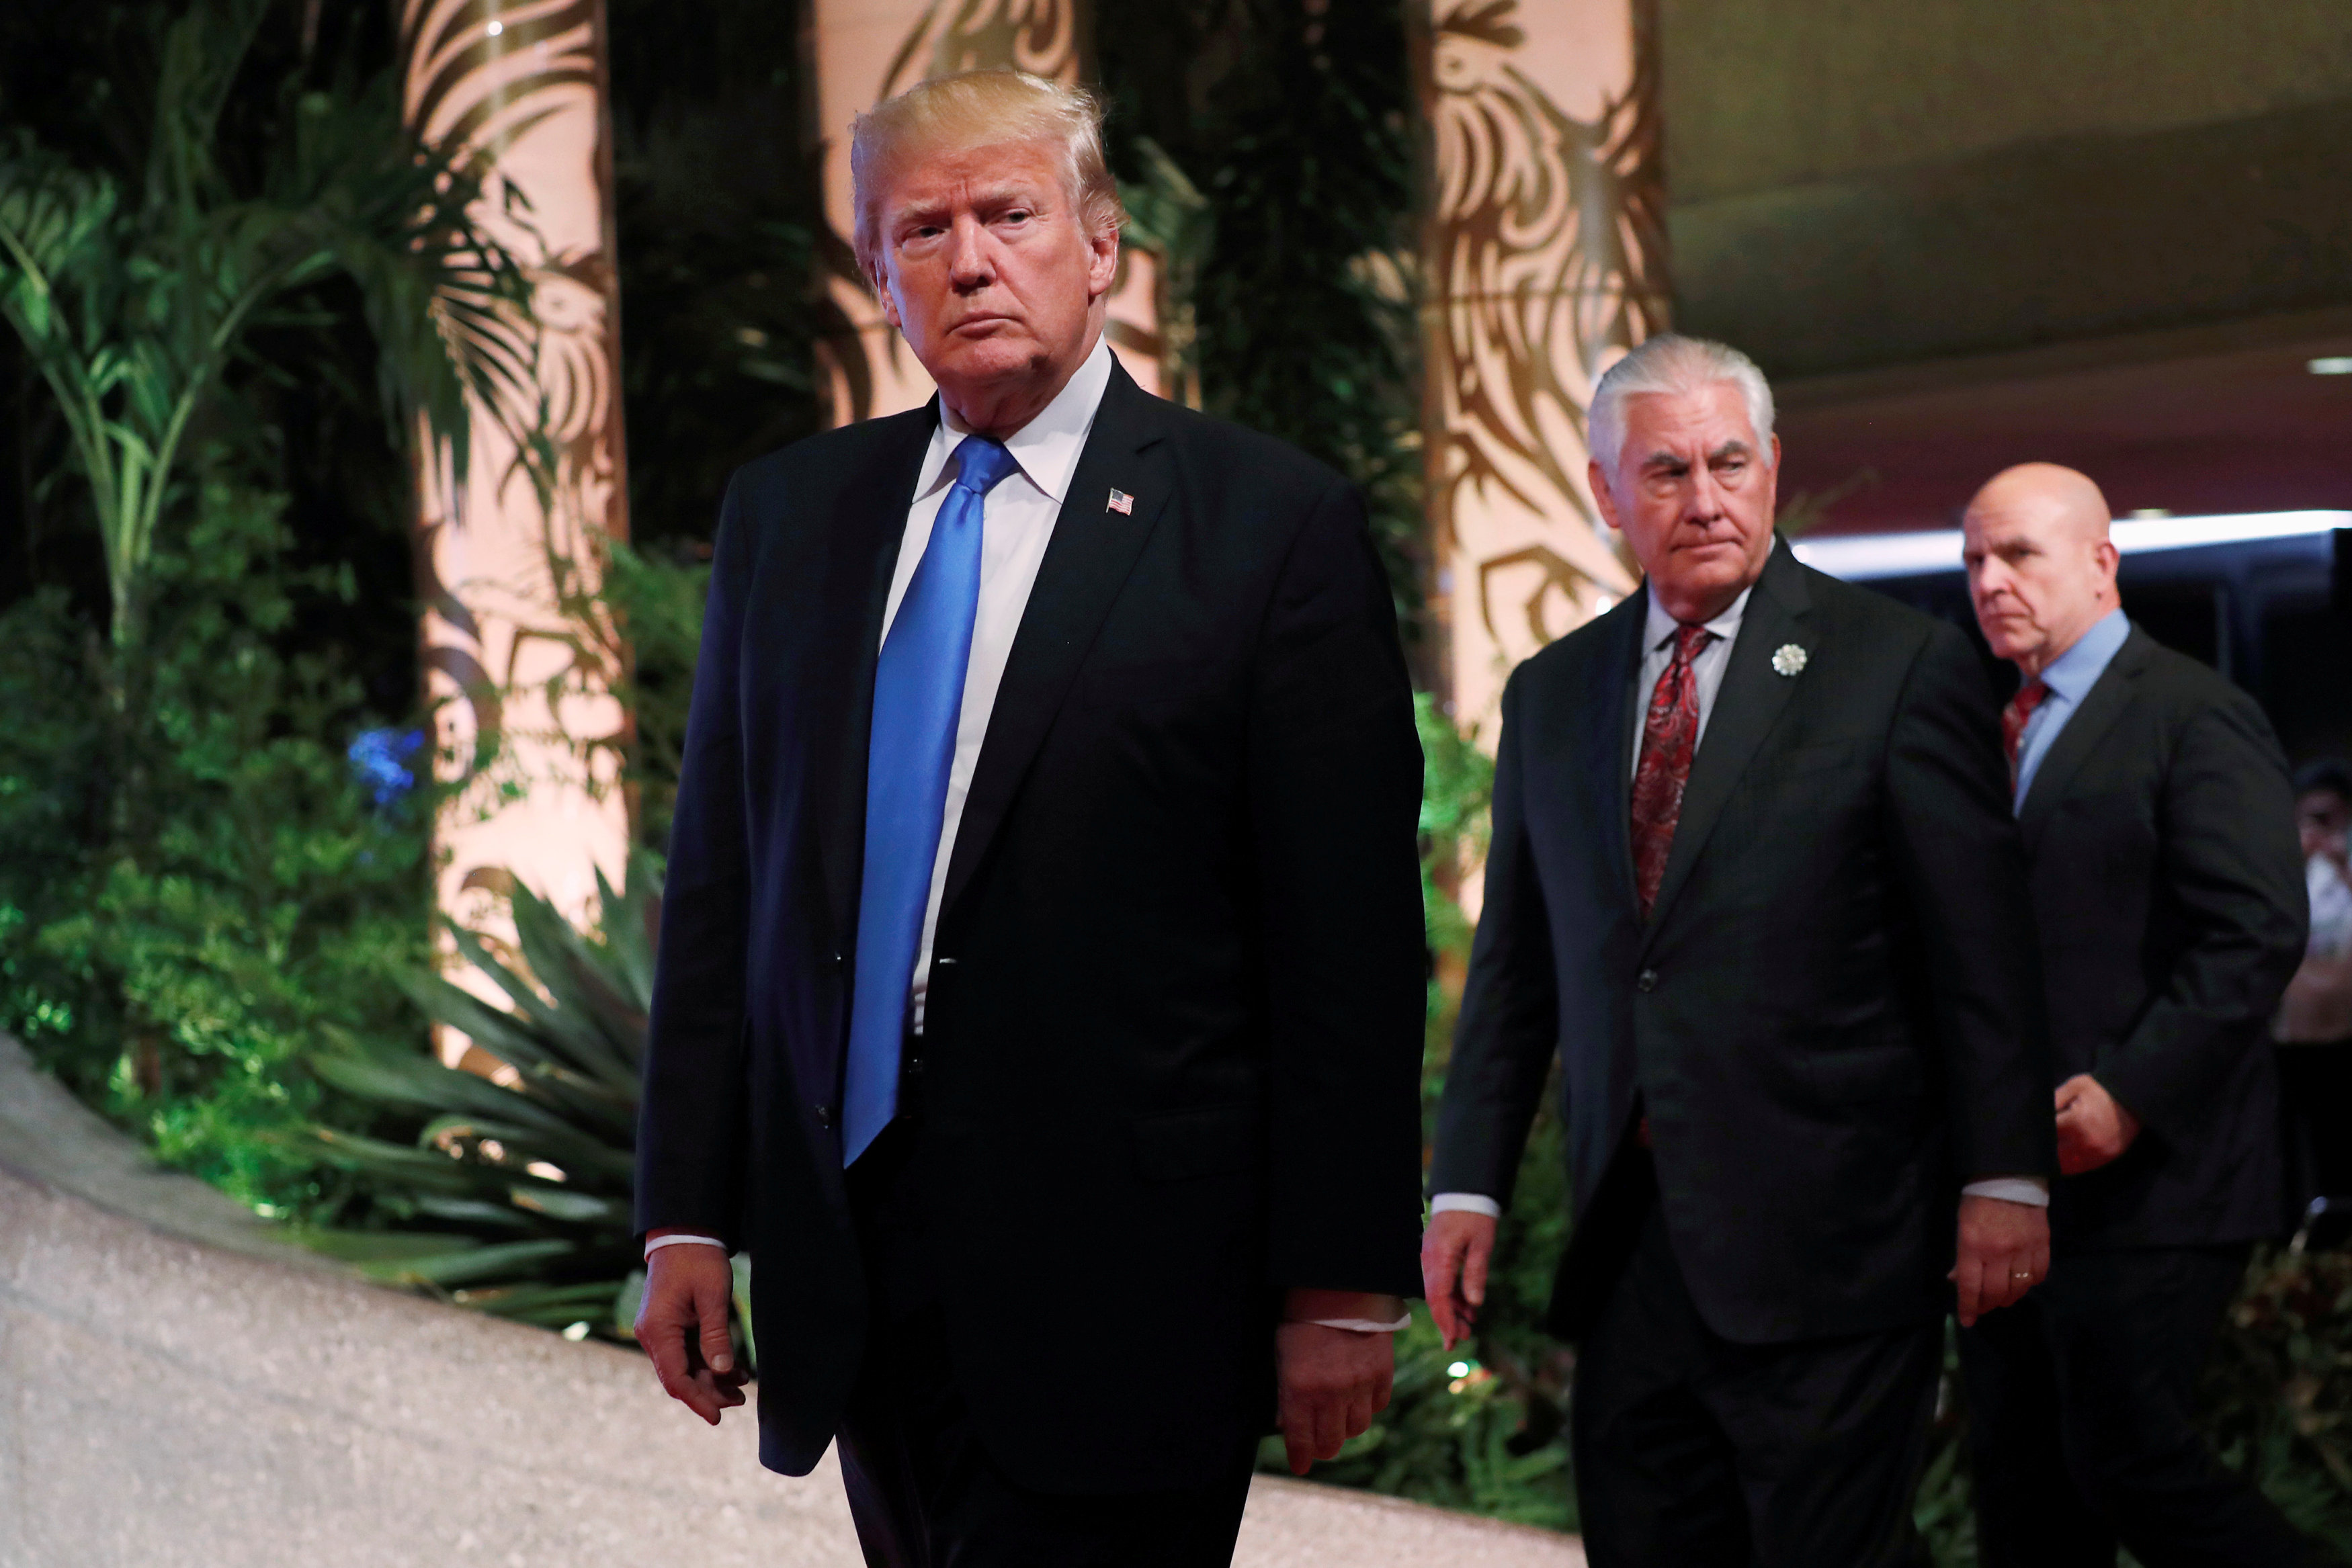 From left: Donald Trump with Rex Tillerson and H.R. McMaster. Photo: Reuters 